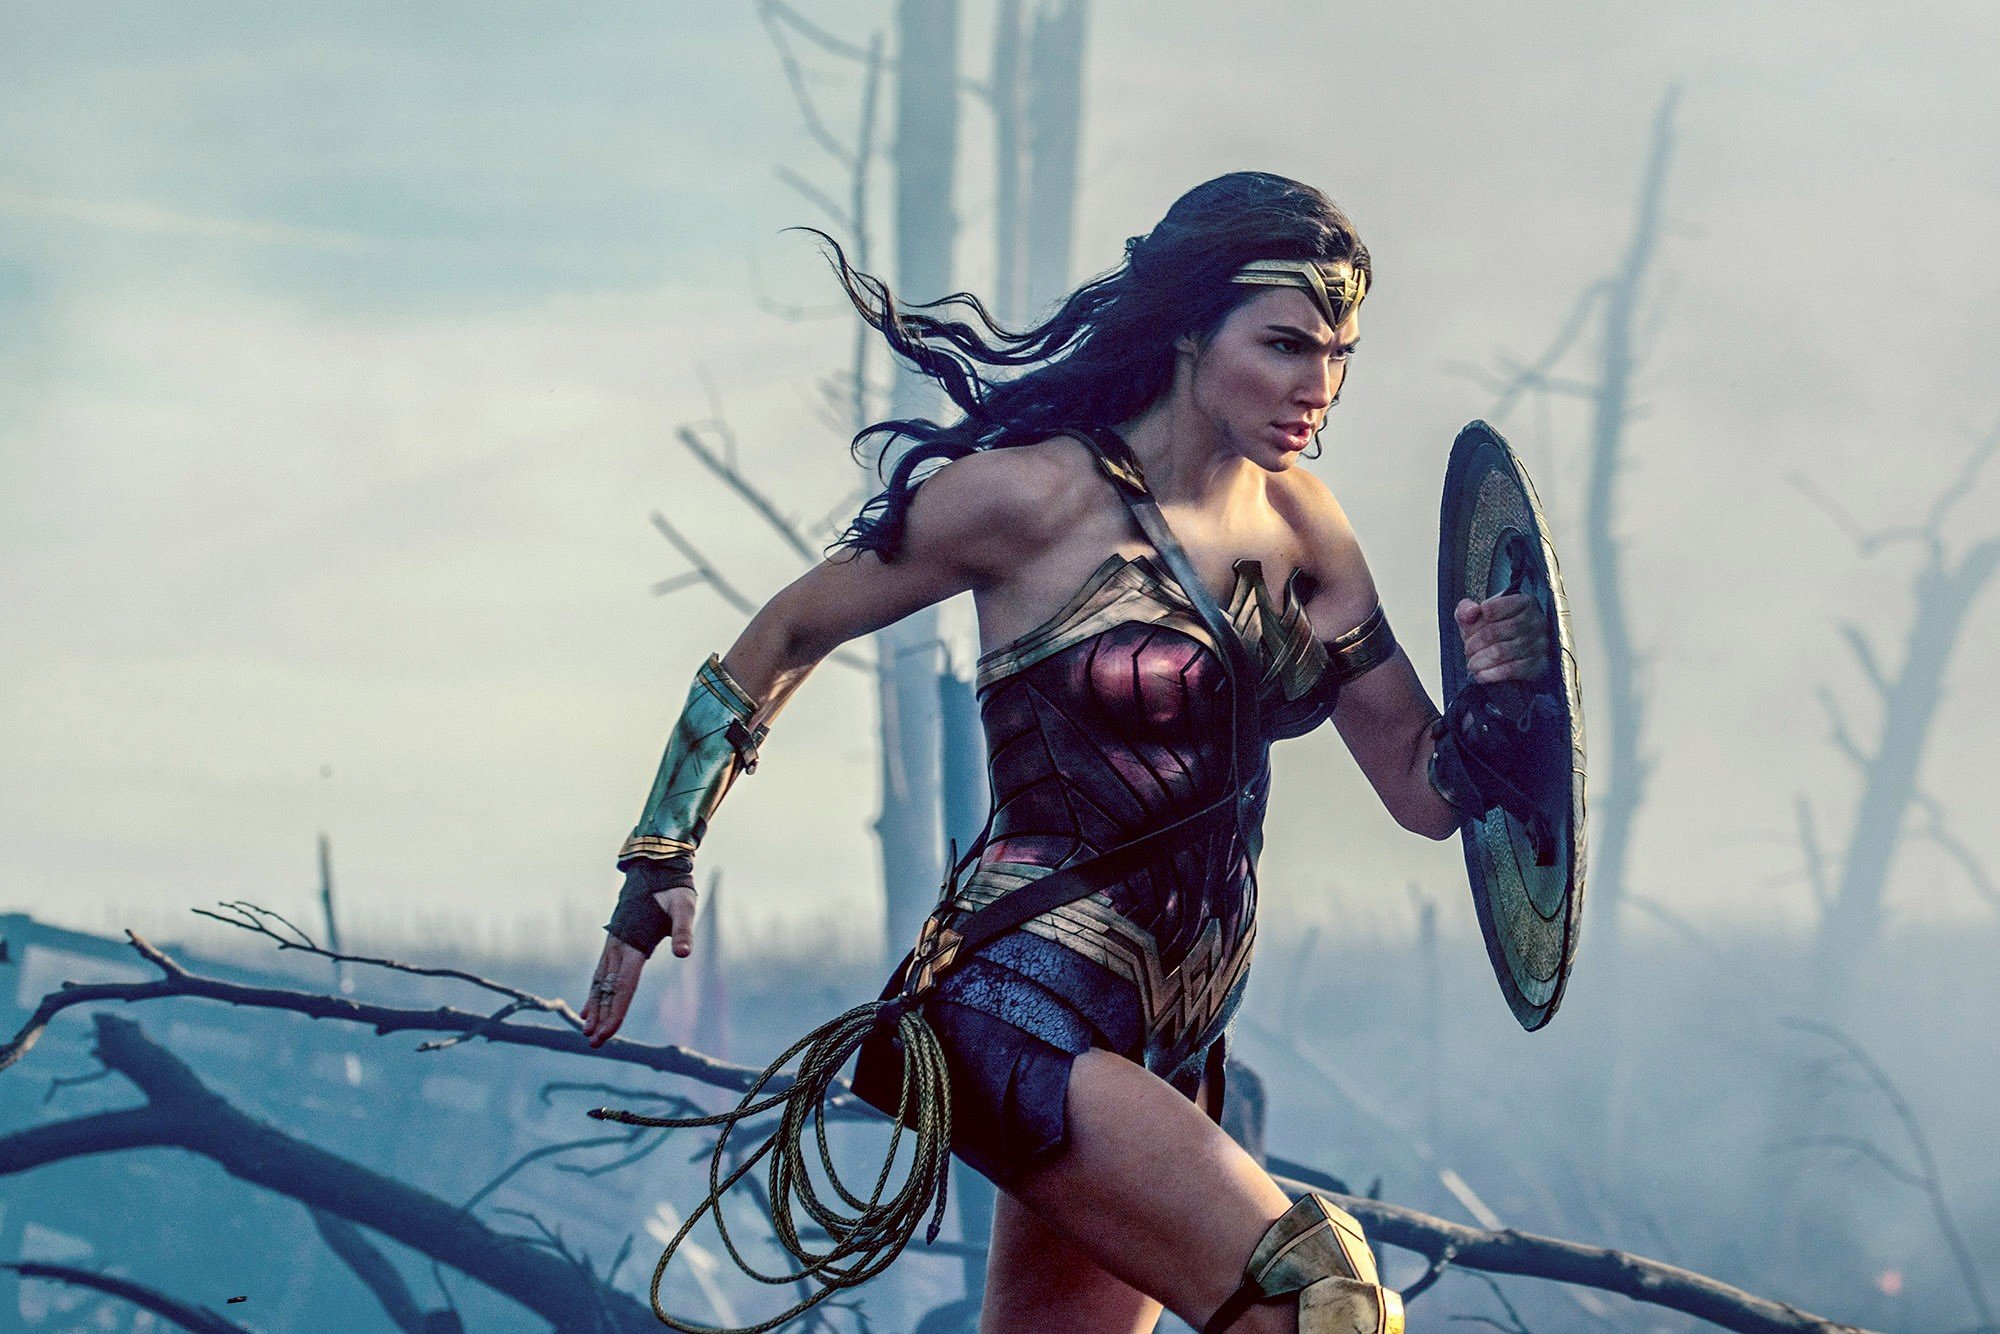 Israeli actress Gal Gadot combined cardio and strength training for six hours a day for six months to prepare herself for the film role of Wonder Woman. Photo: Clay Enos/DC Comics/Warner Bros. Pictures